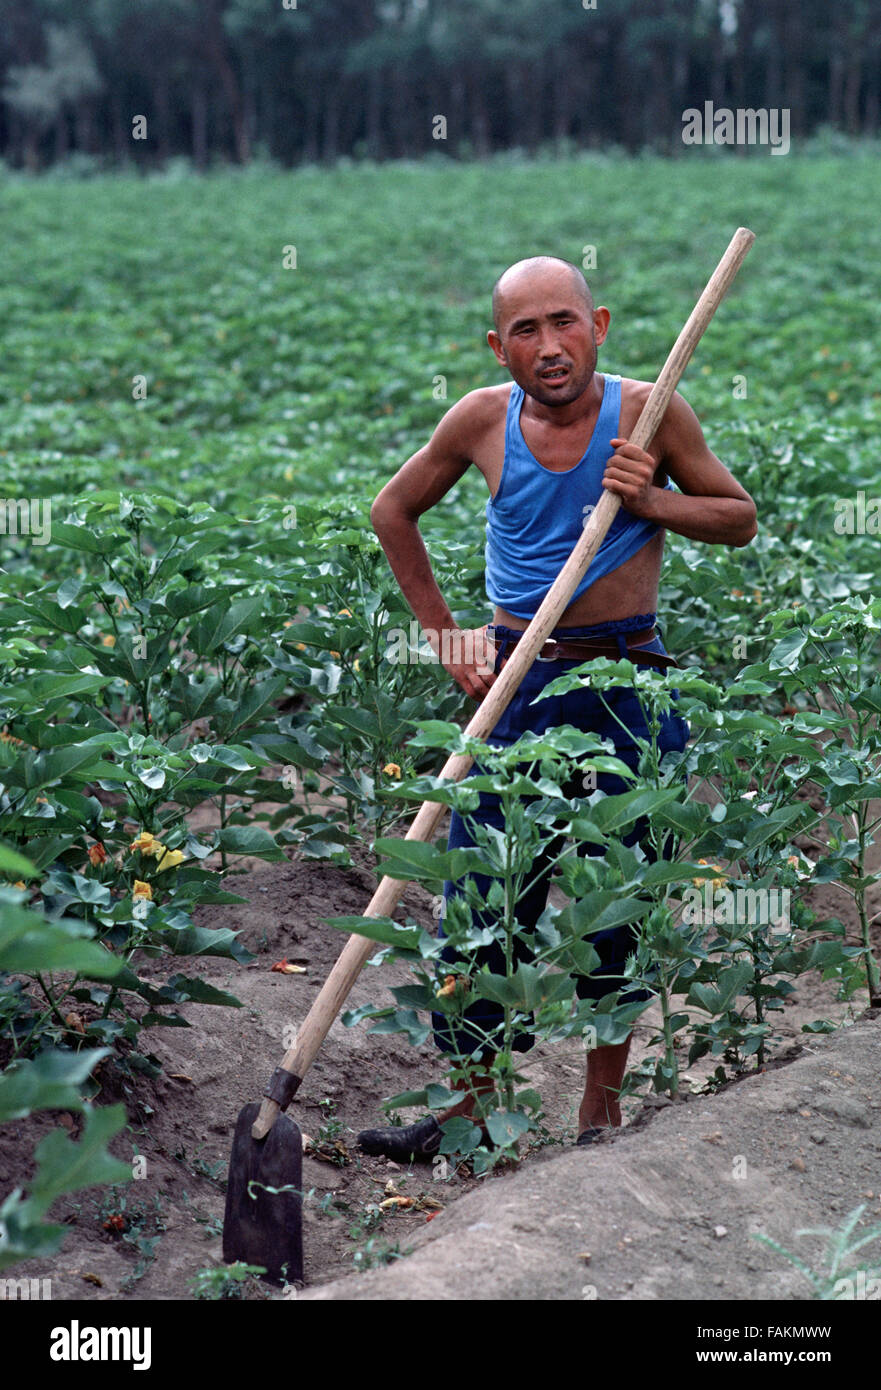 Agricultural worker in Turpan, Xinjiang Province, Northwest China Stock Photo